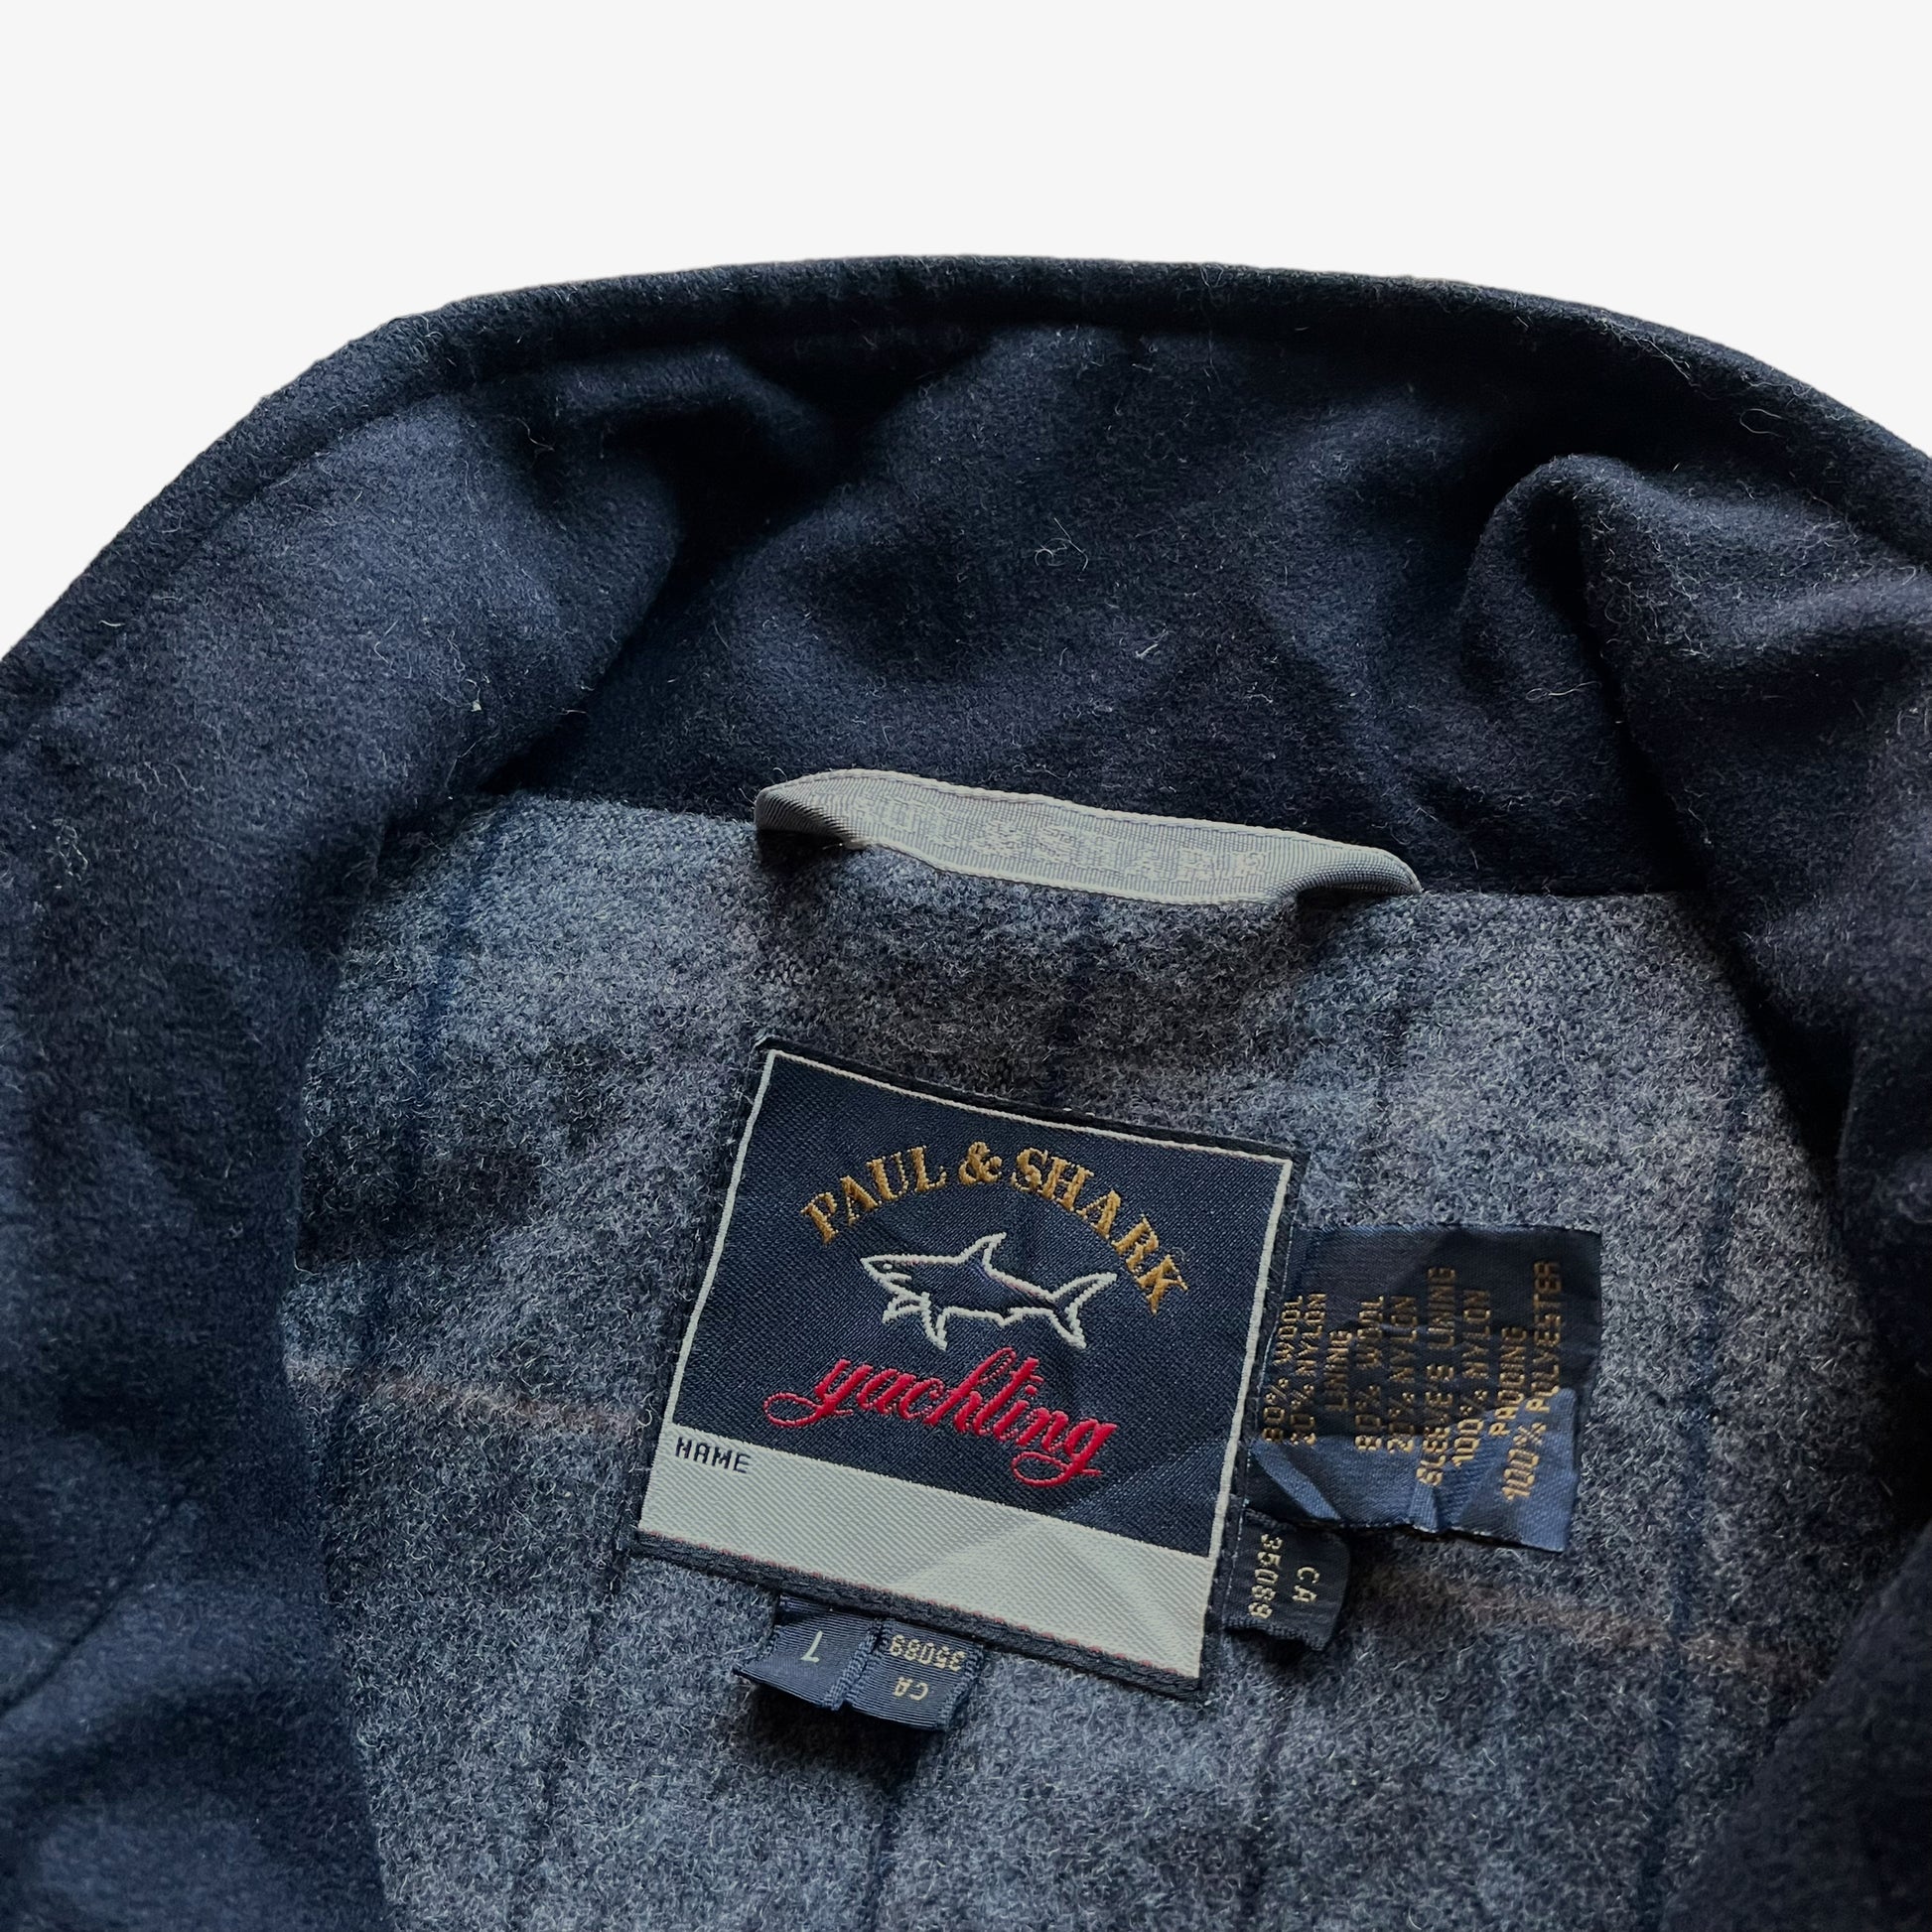 Vintage 90s Paul And Shark Wool Blend Valtherm Coat Label - Casspios Dream